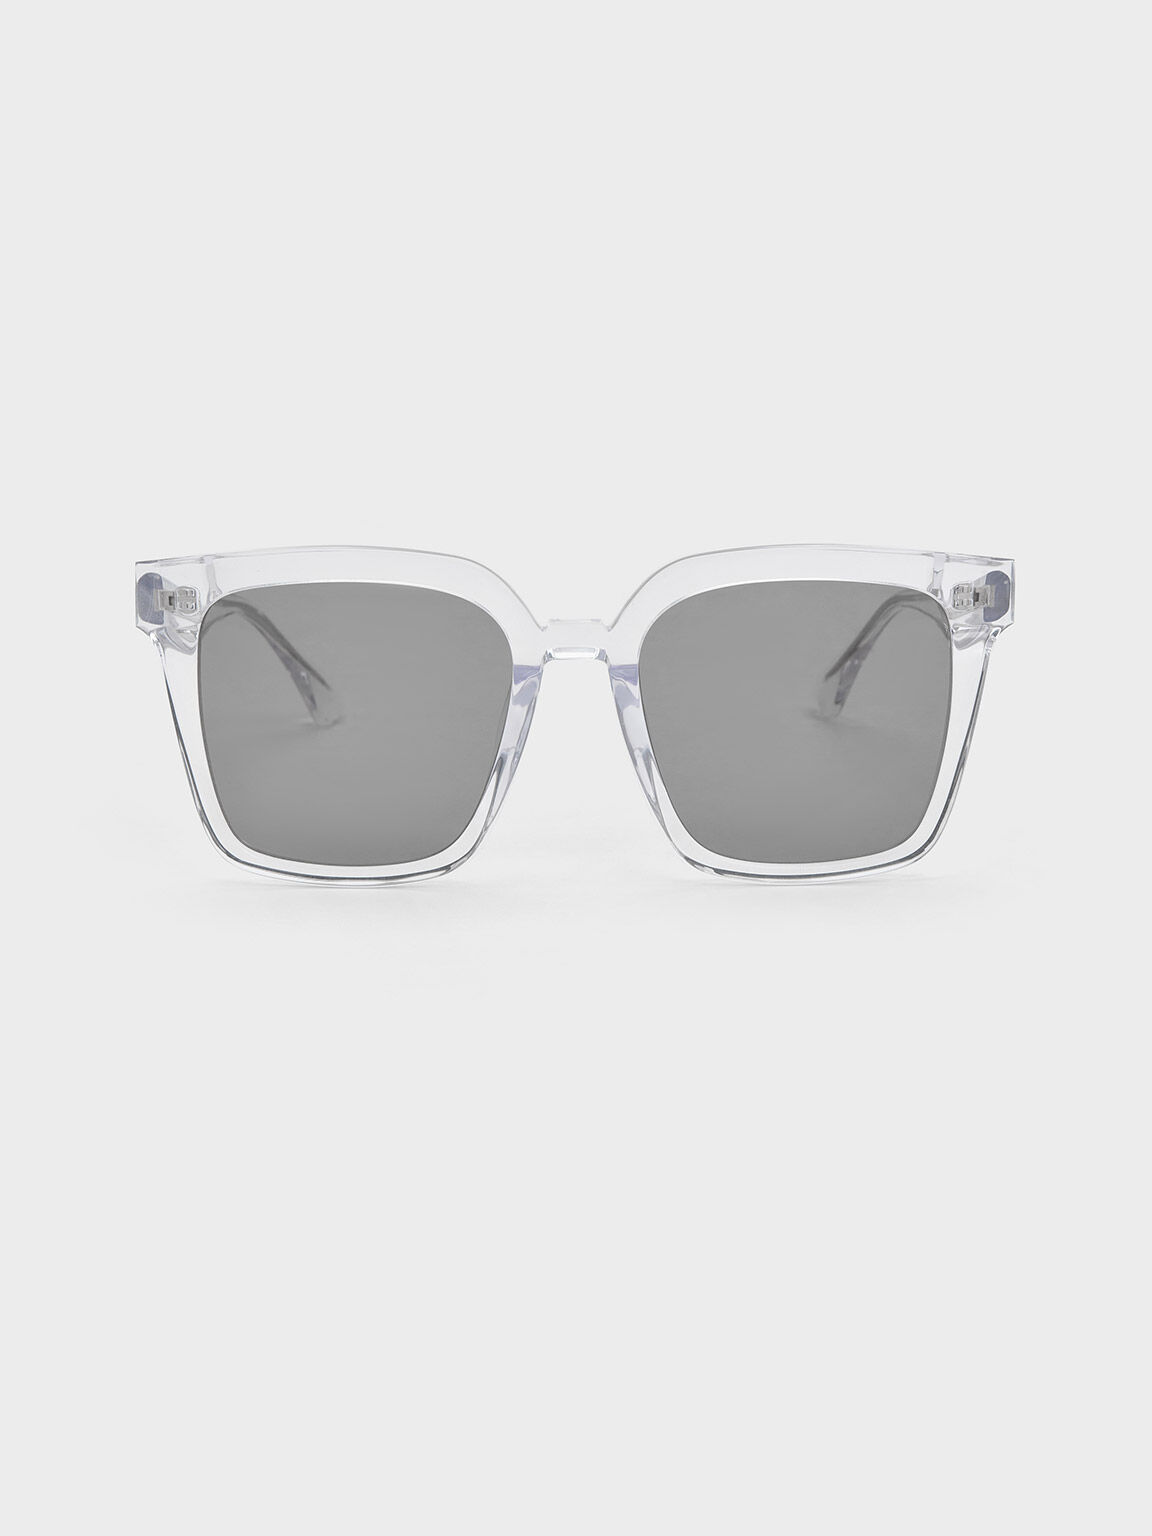 Athene | Clear | Clear sunglasses frames, Clear sunglasses, How to look  better